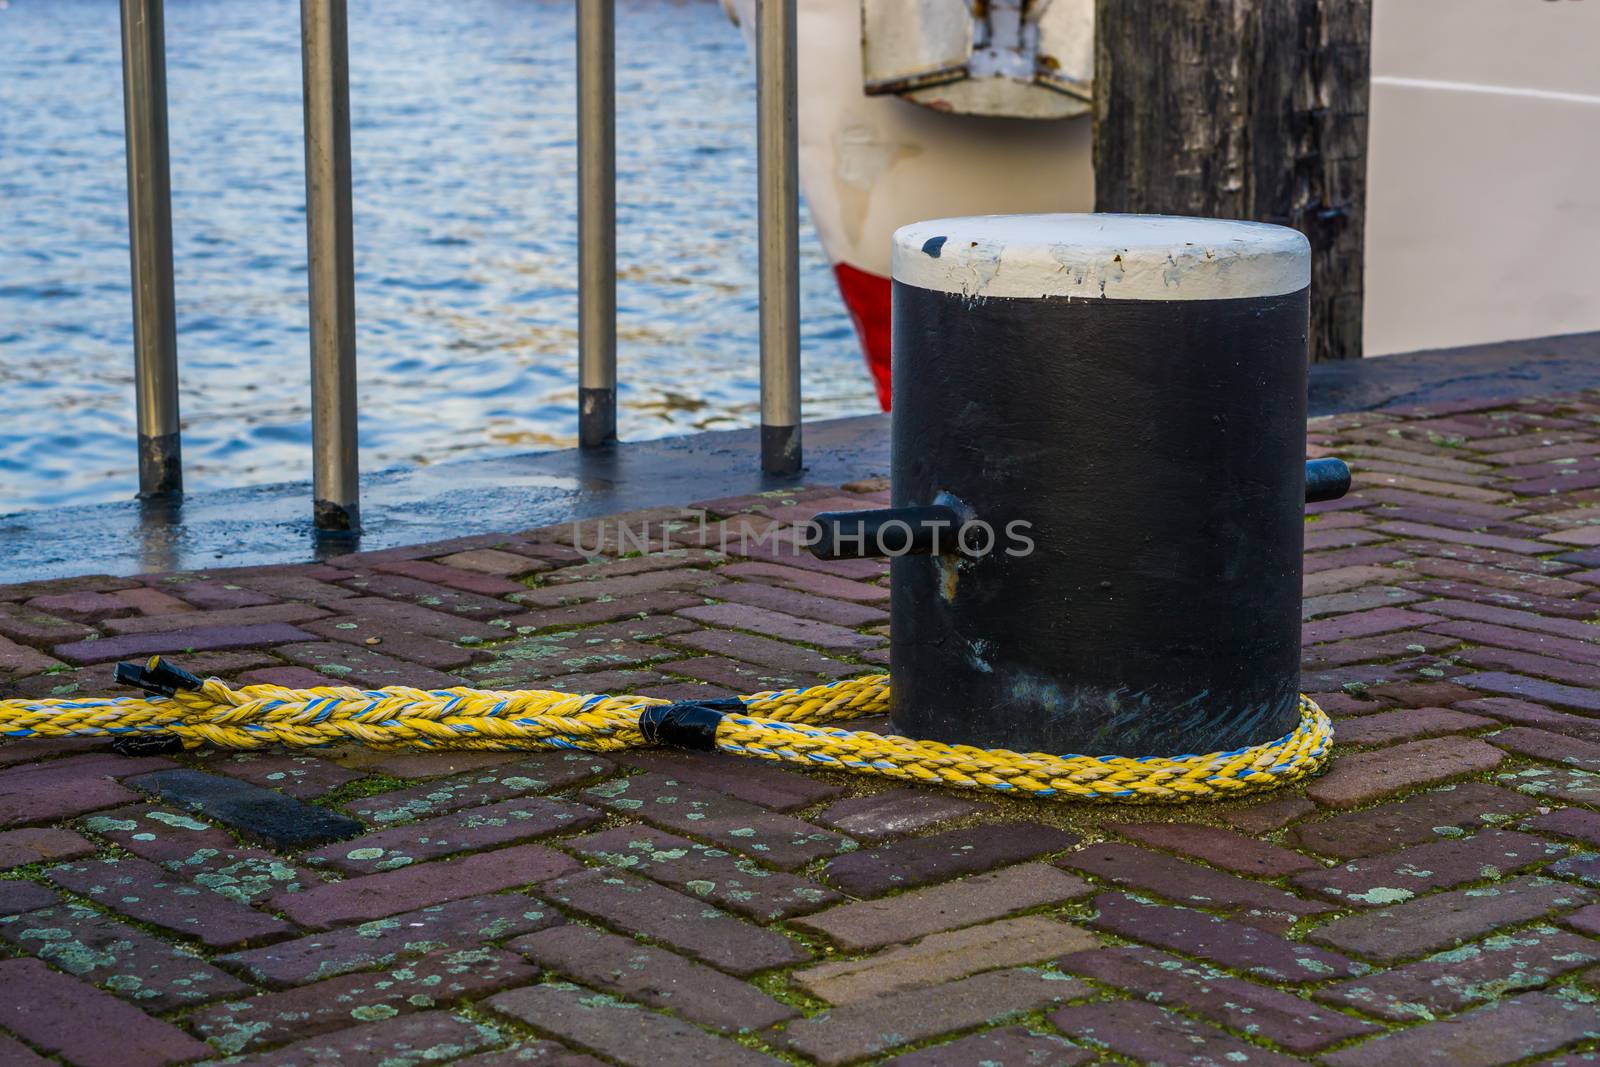 Docking pole with a rope to secure the boat, equipment at the harbor, water transportation background by charlottebleijenberg